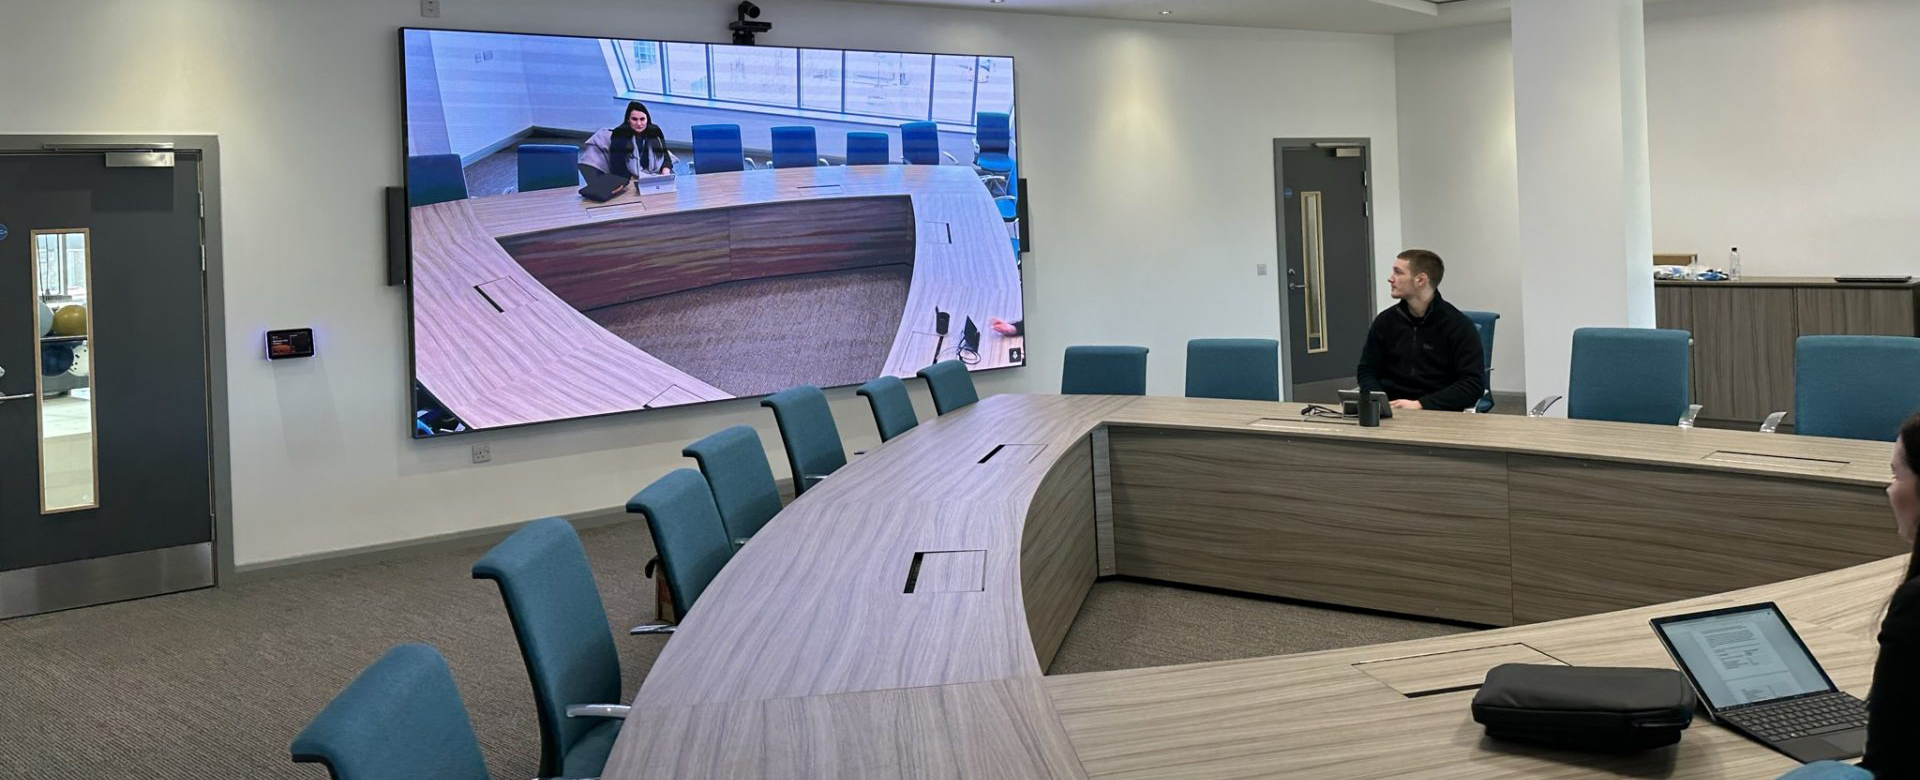 fine pitch LED screen for conference